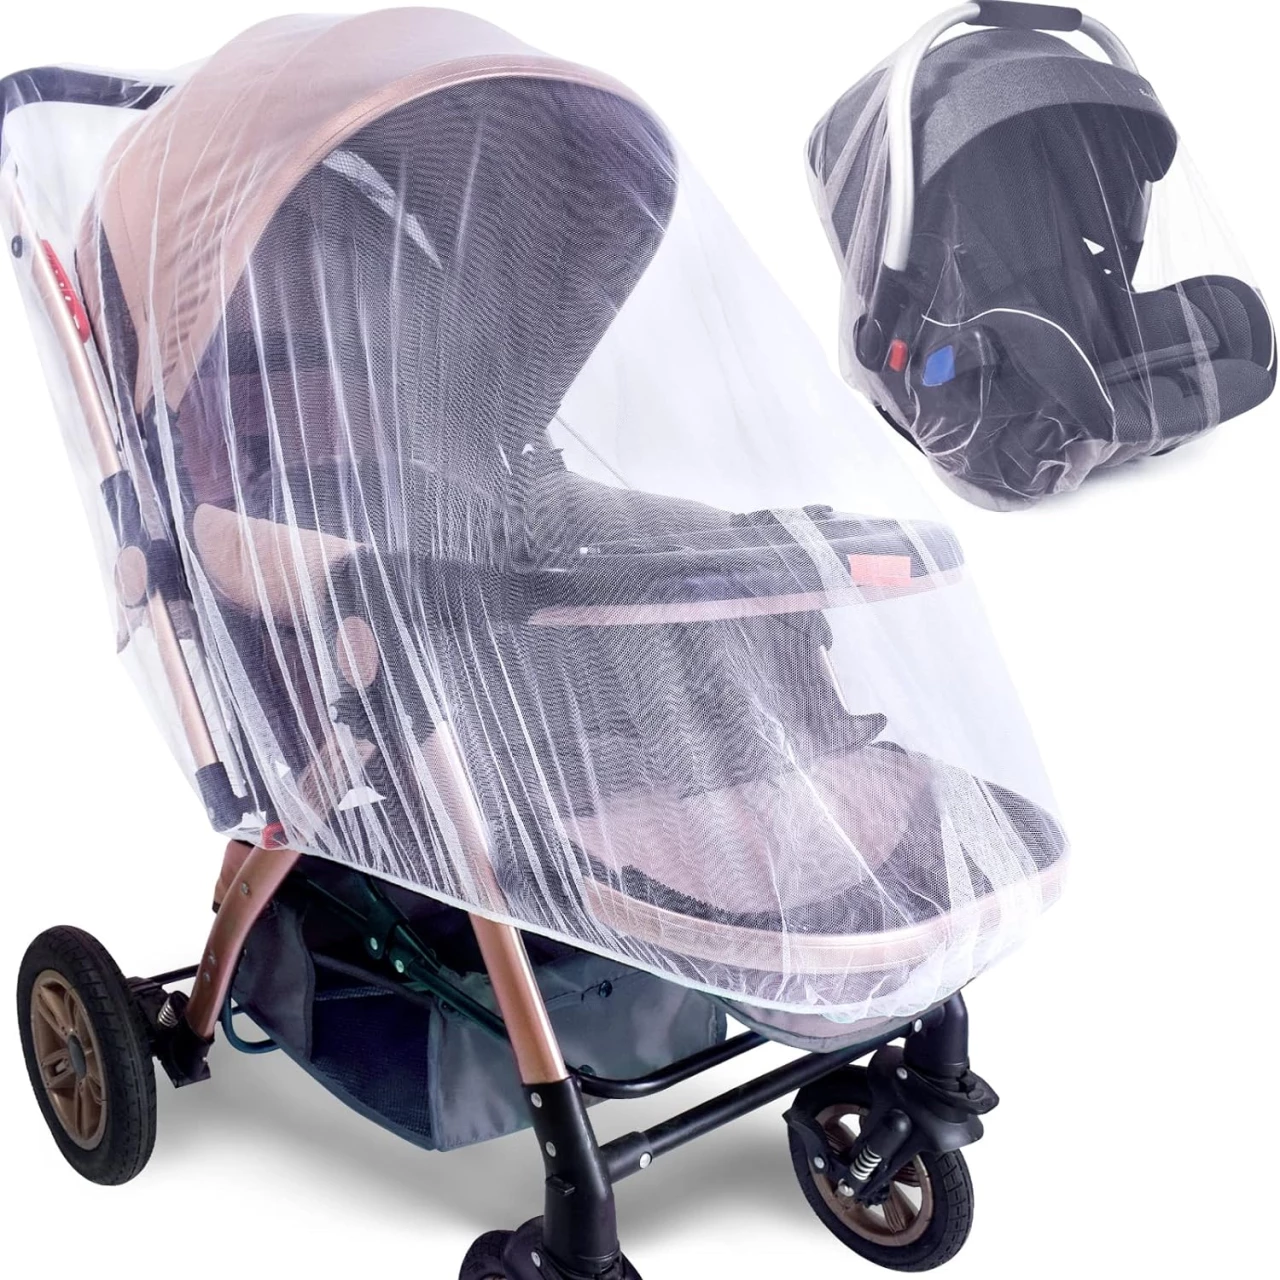 Mosquito Net for Stroller - 2 Pack Durable Baby Stroller Mosquito Net (White)